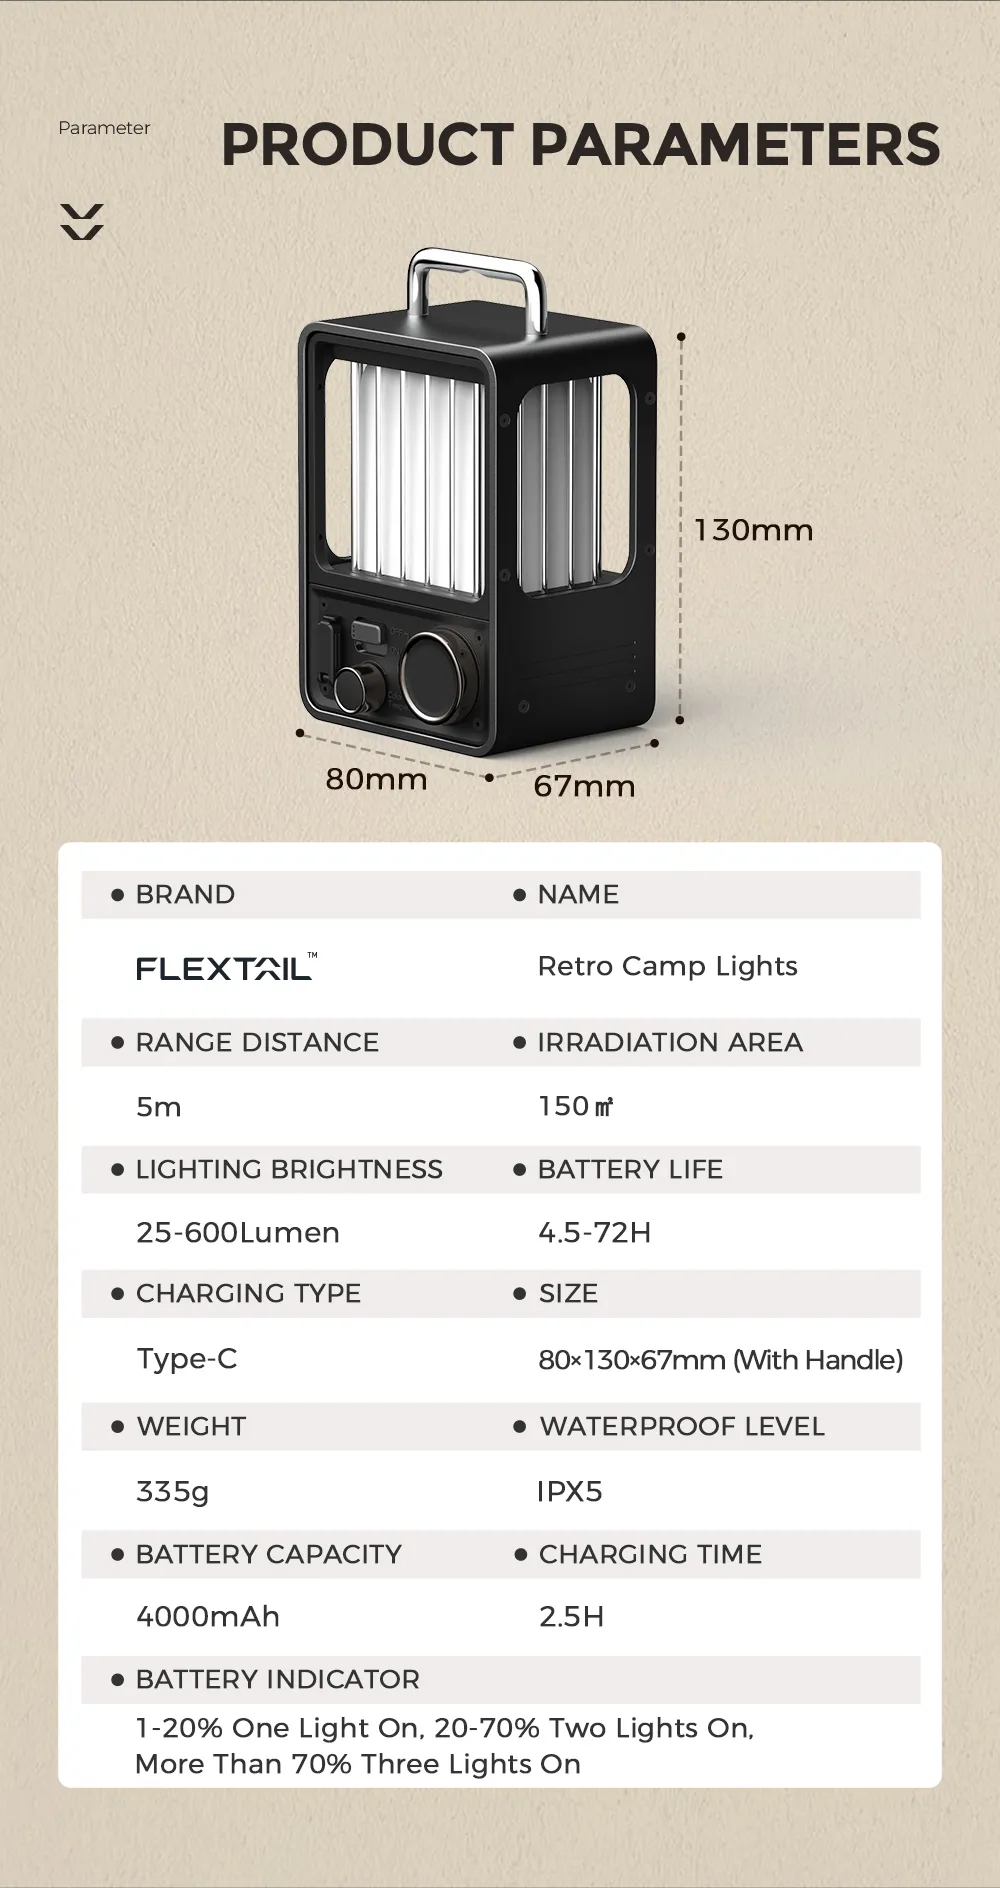 Retro Camp Lights Specification